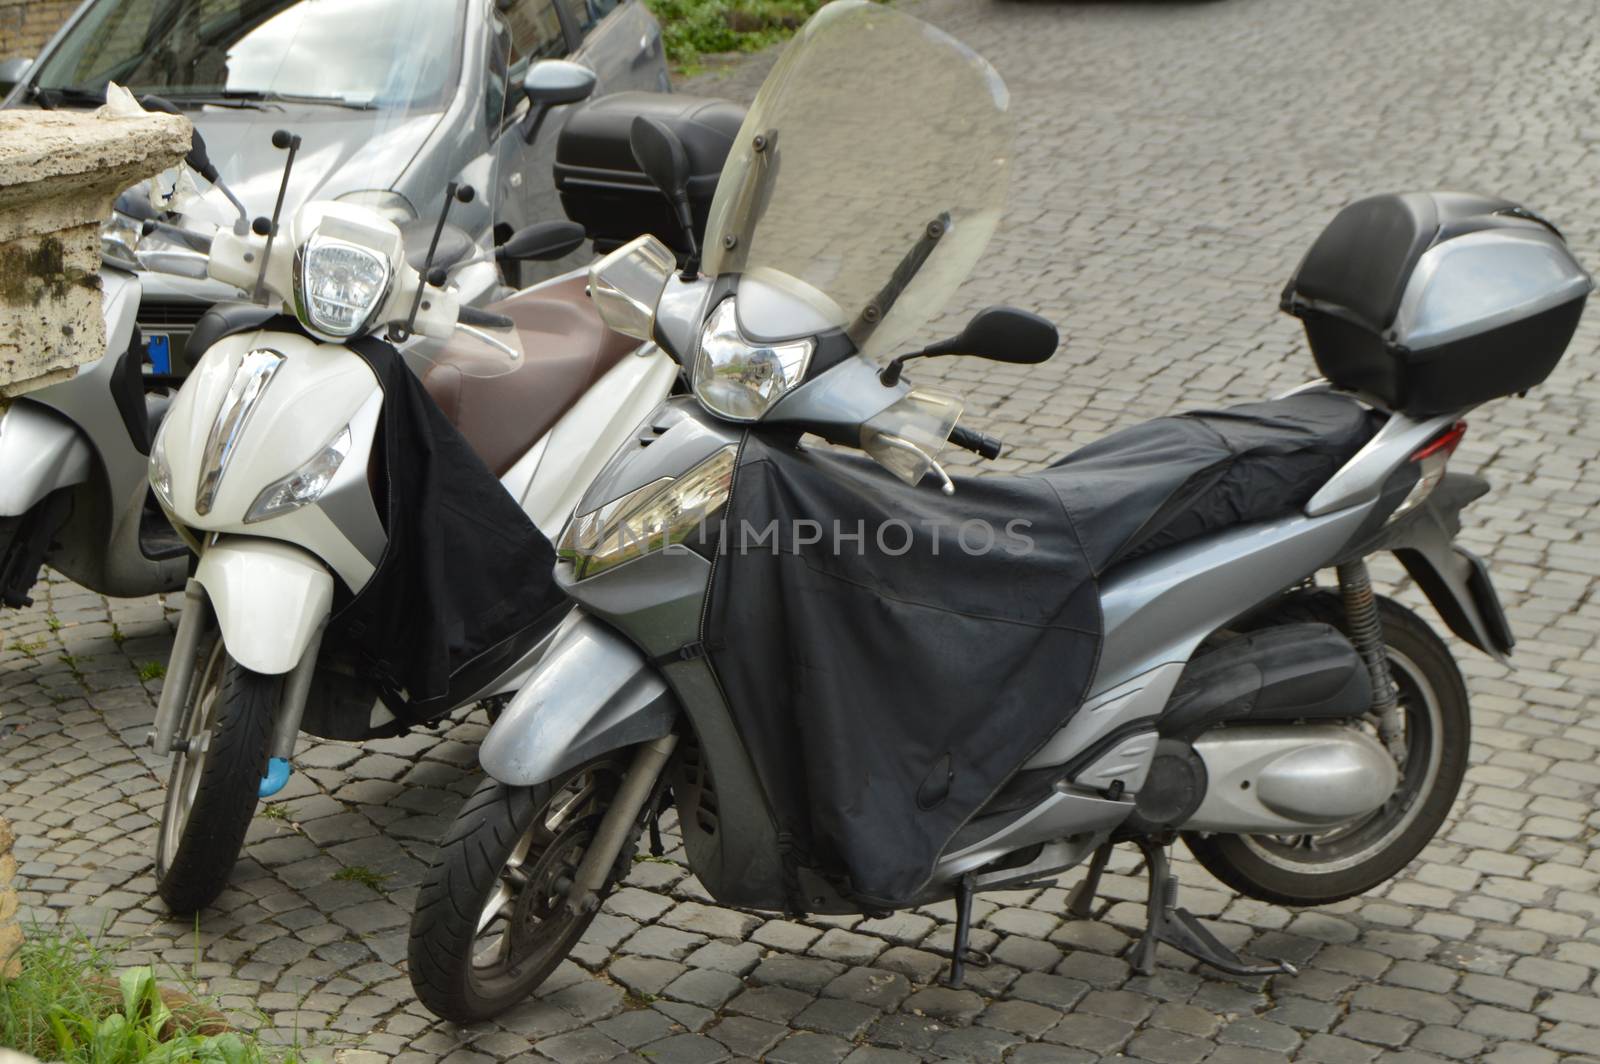 Two black motorcycles are parked on the street in Rome, Italy.